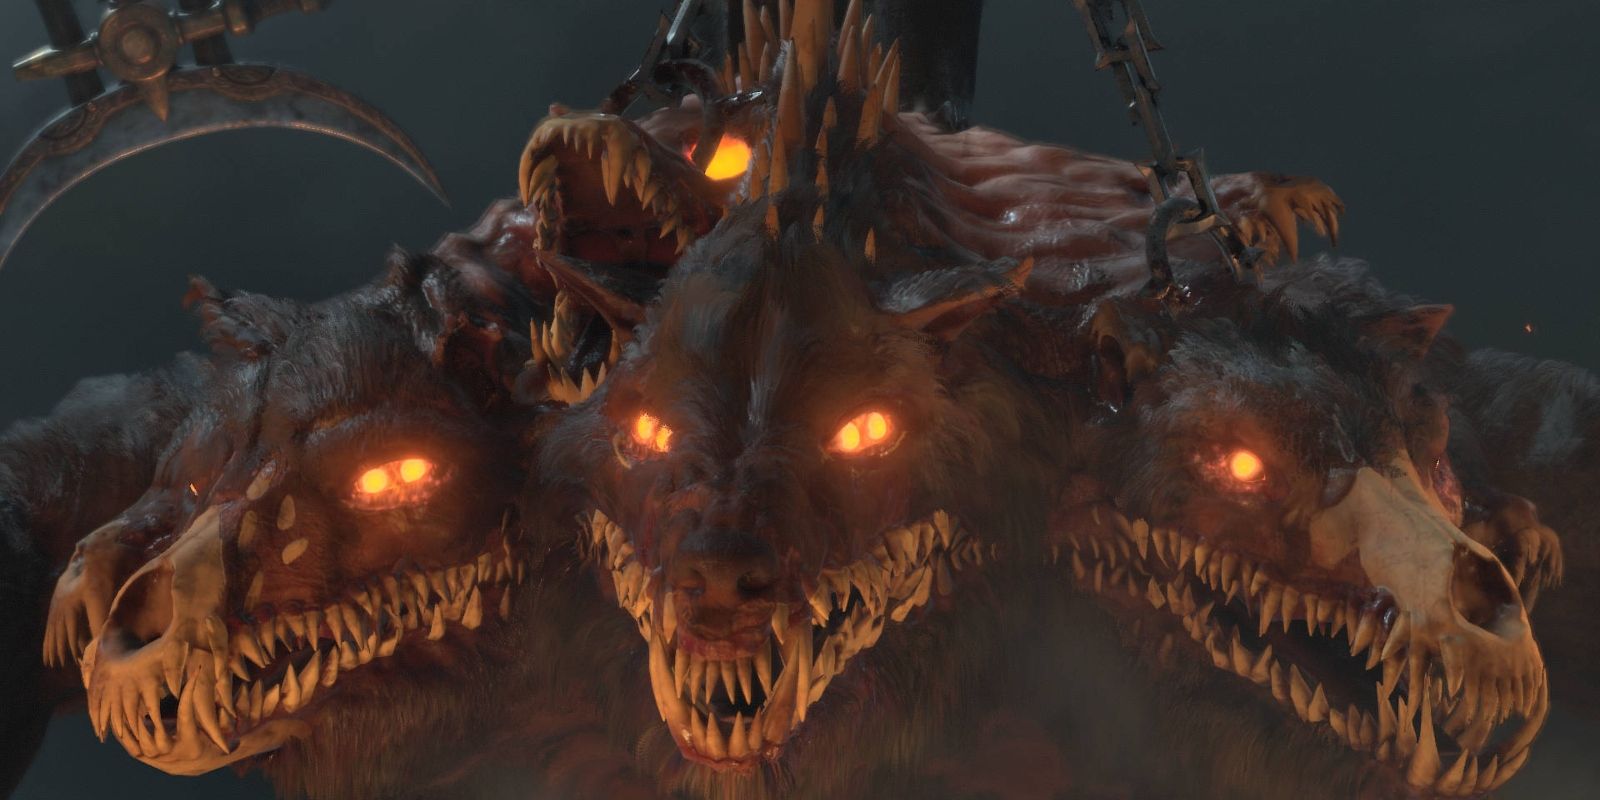 A four headed beast with glowing yellow eyes looking menacingly at the viewer.